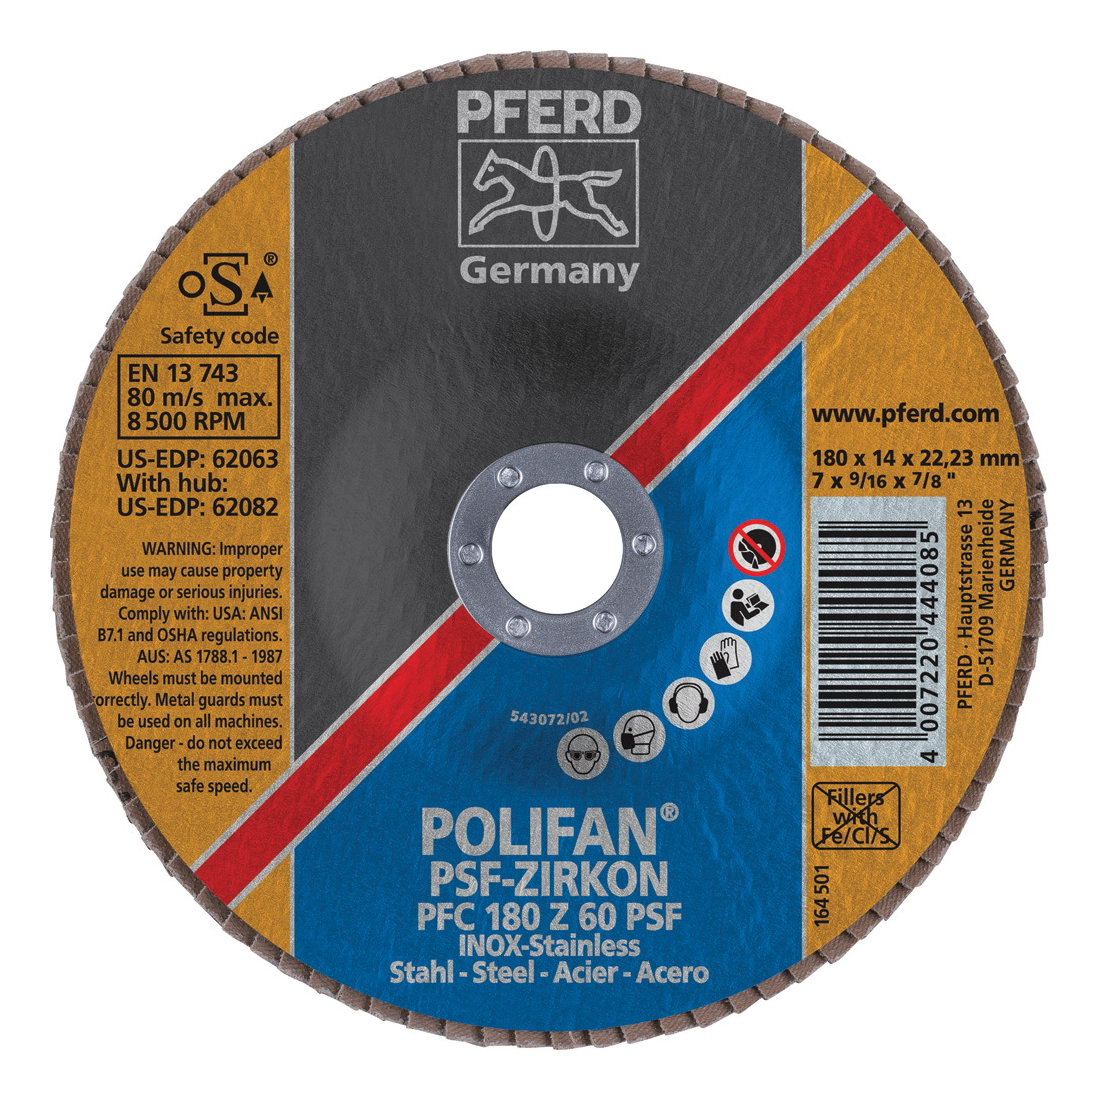 PFERD Polifan® 62063 Universal Line PSF-Z Unthreaded Coated Abrasive Flap Disc, 7 in Dia, 7/8 in Center Hole, 60 Grit, Zirconia Alumina Abrasive, Type 29 Conical Disc